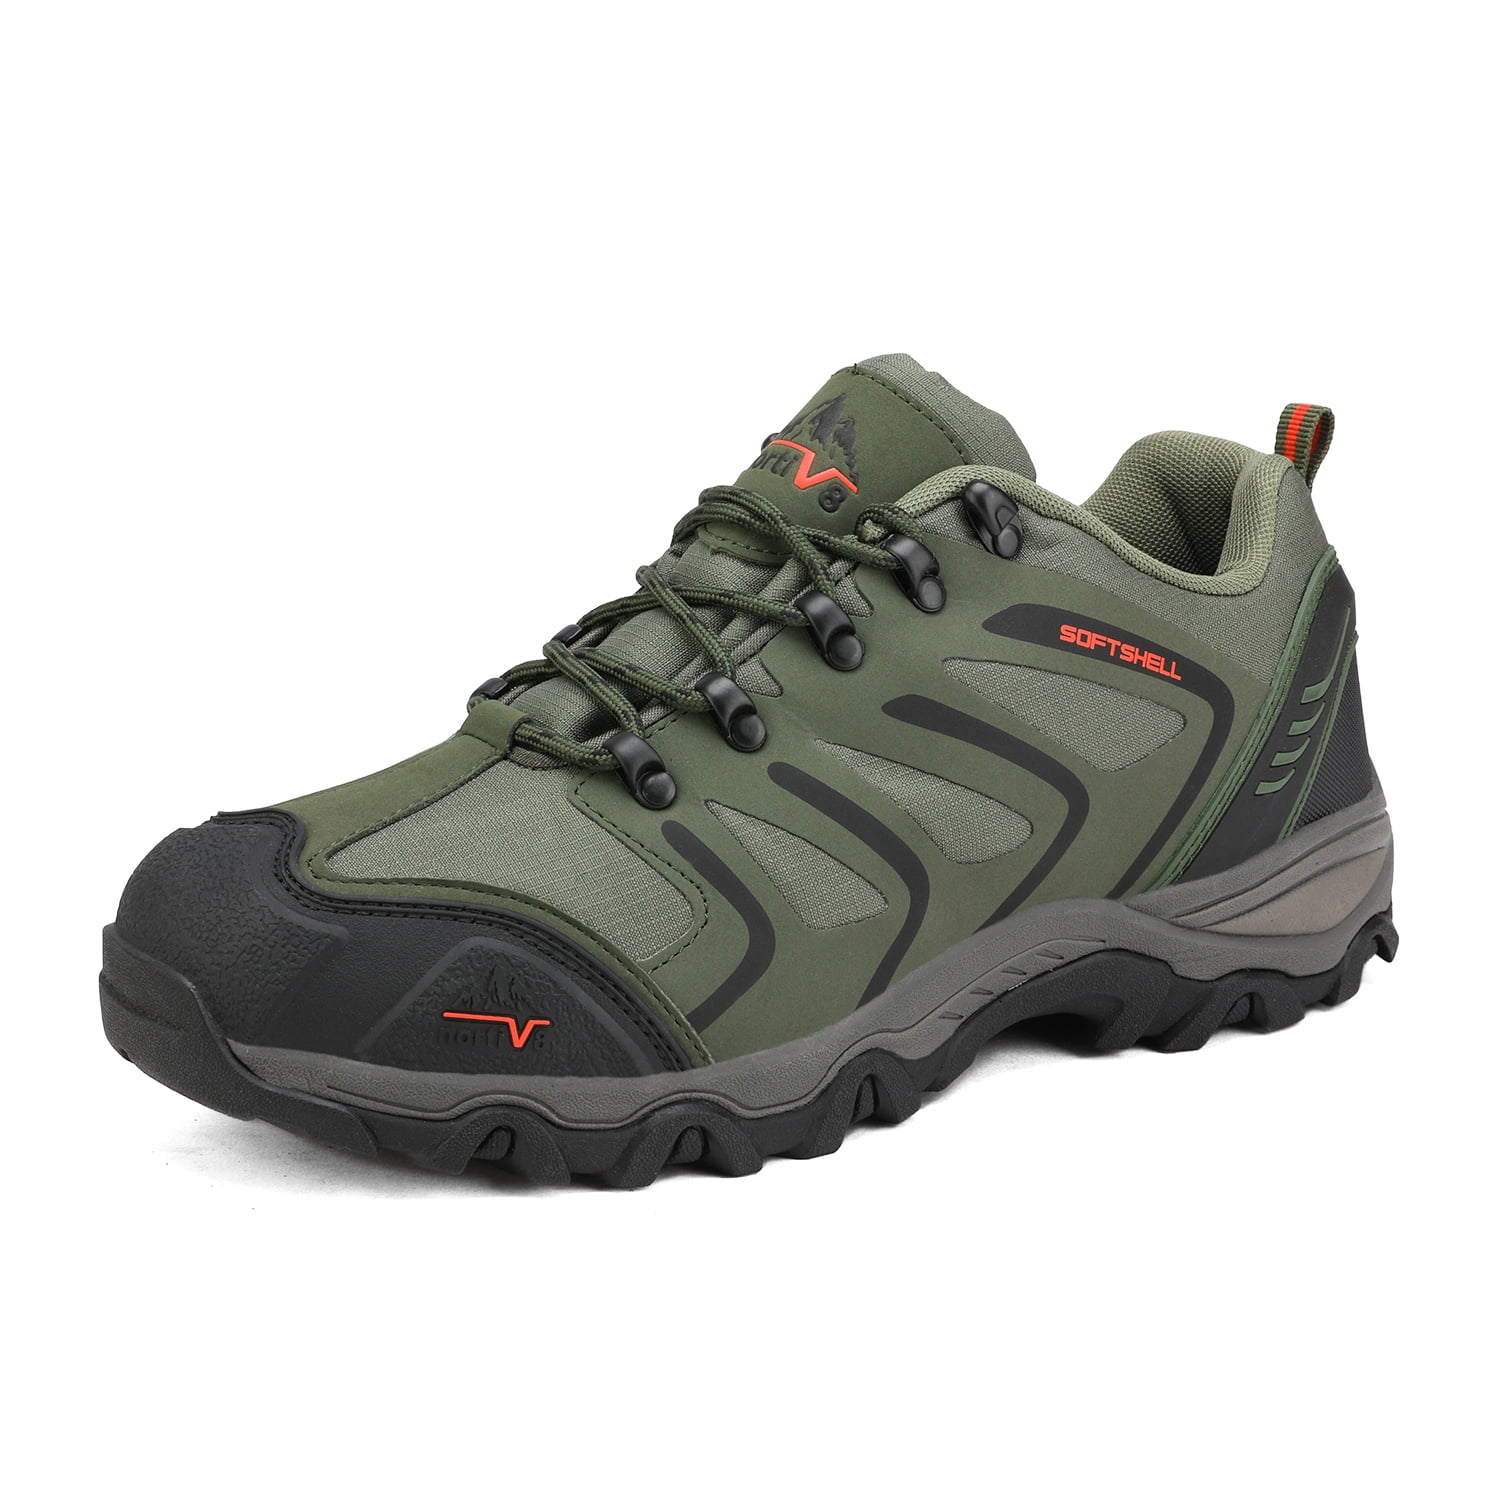 orange, black and green low cut hiking boots